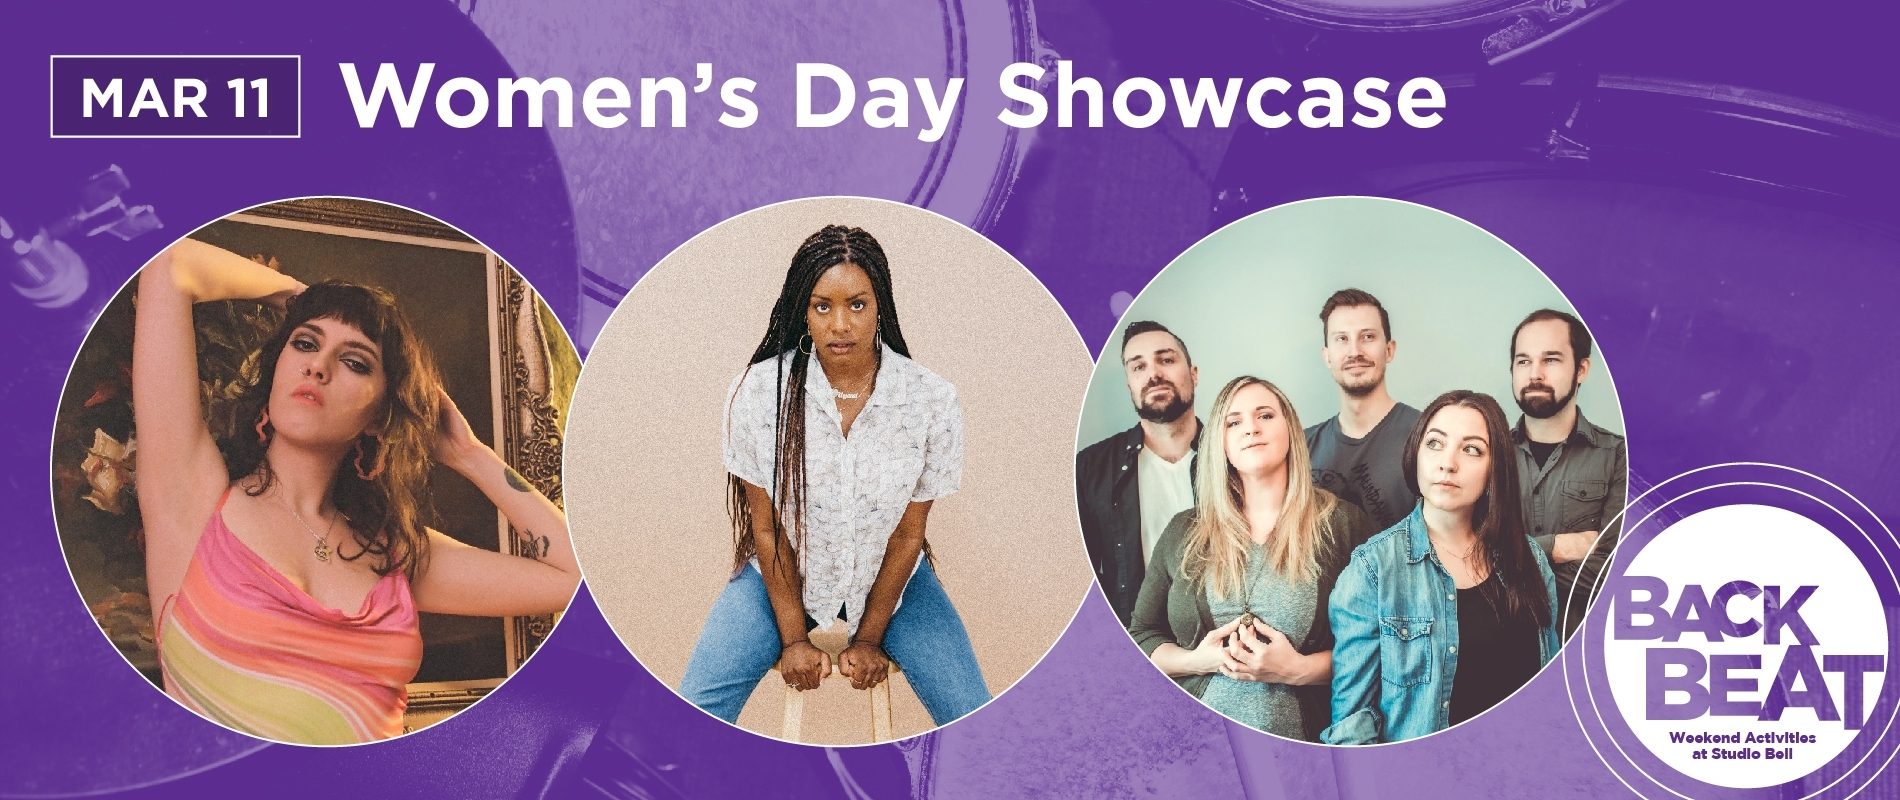 National Music Centre Celebrates Women’s History Month with Showcase Featuring Uyemi, Kue Varo & The Only Hopes, and Cold Little Crow on March 11